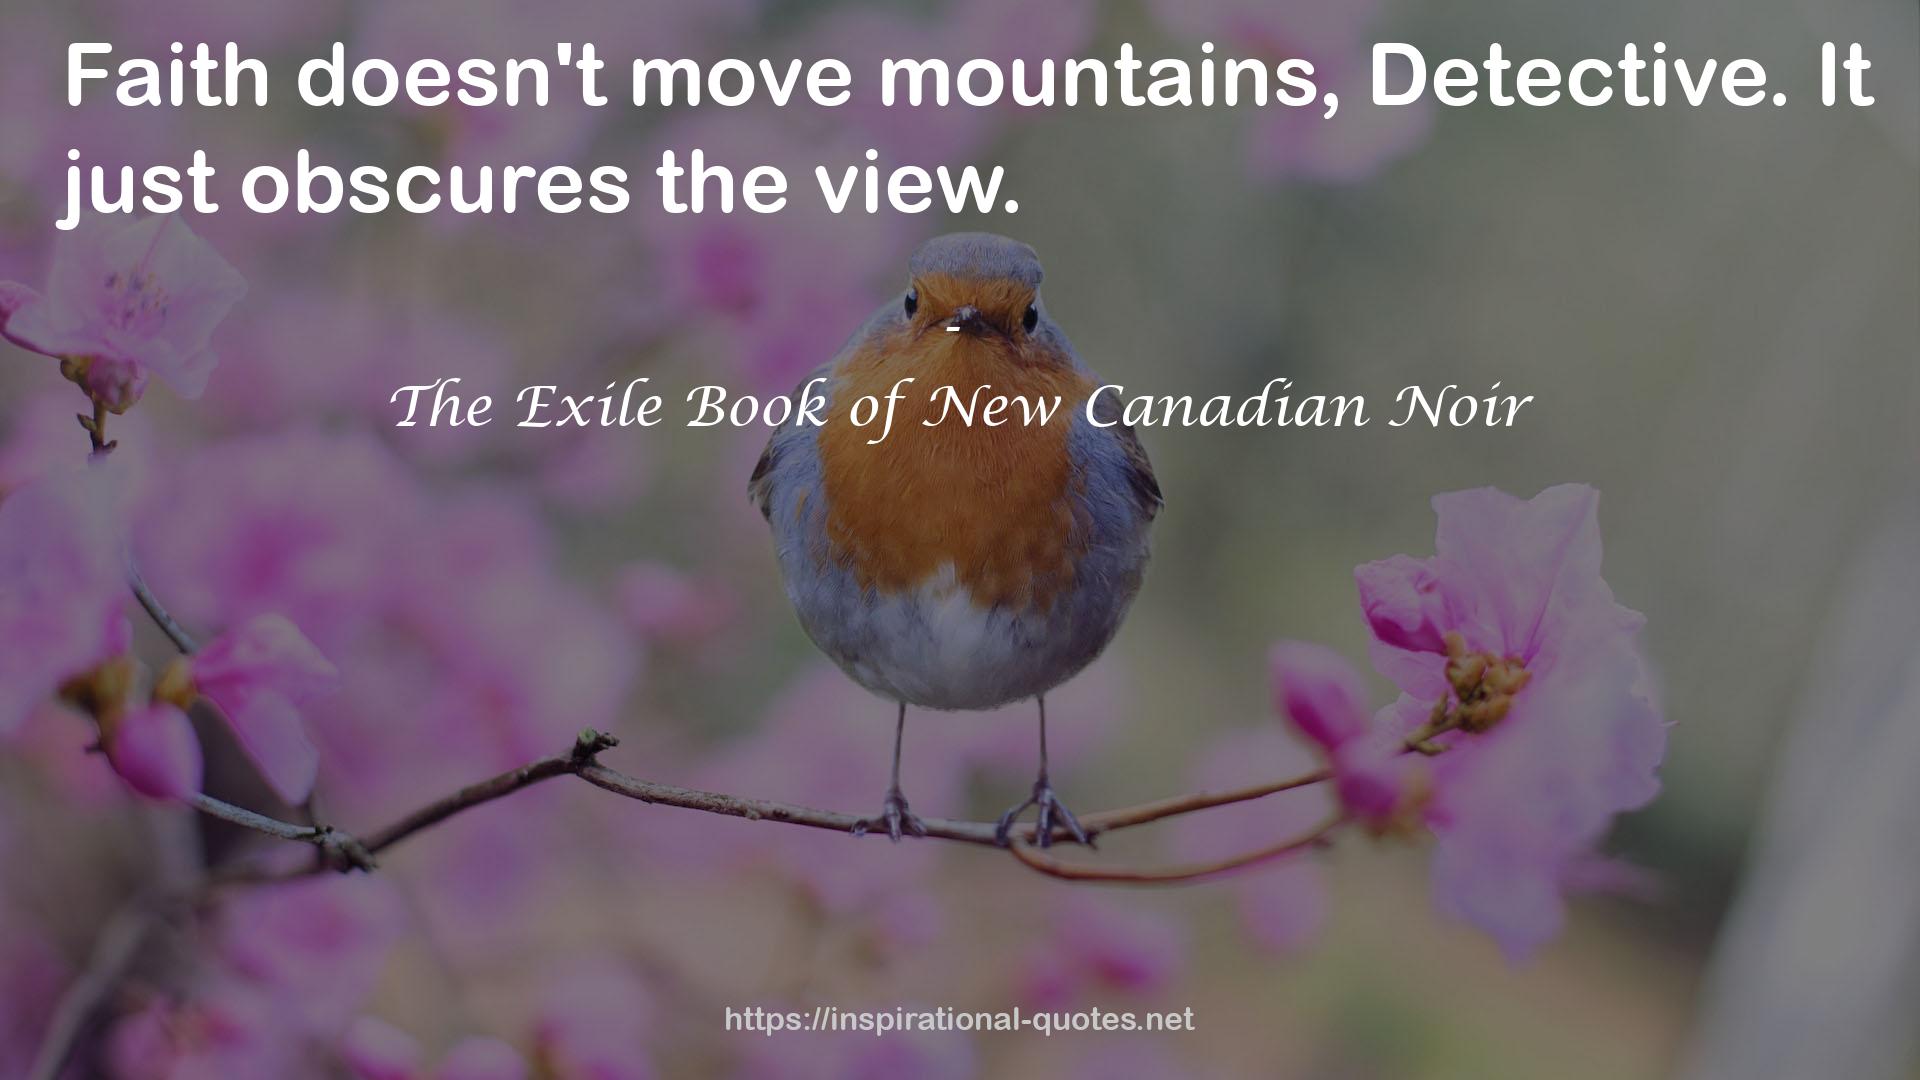 The Exile Book of New Canadian Noir QUOTES